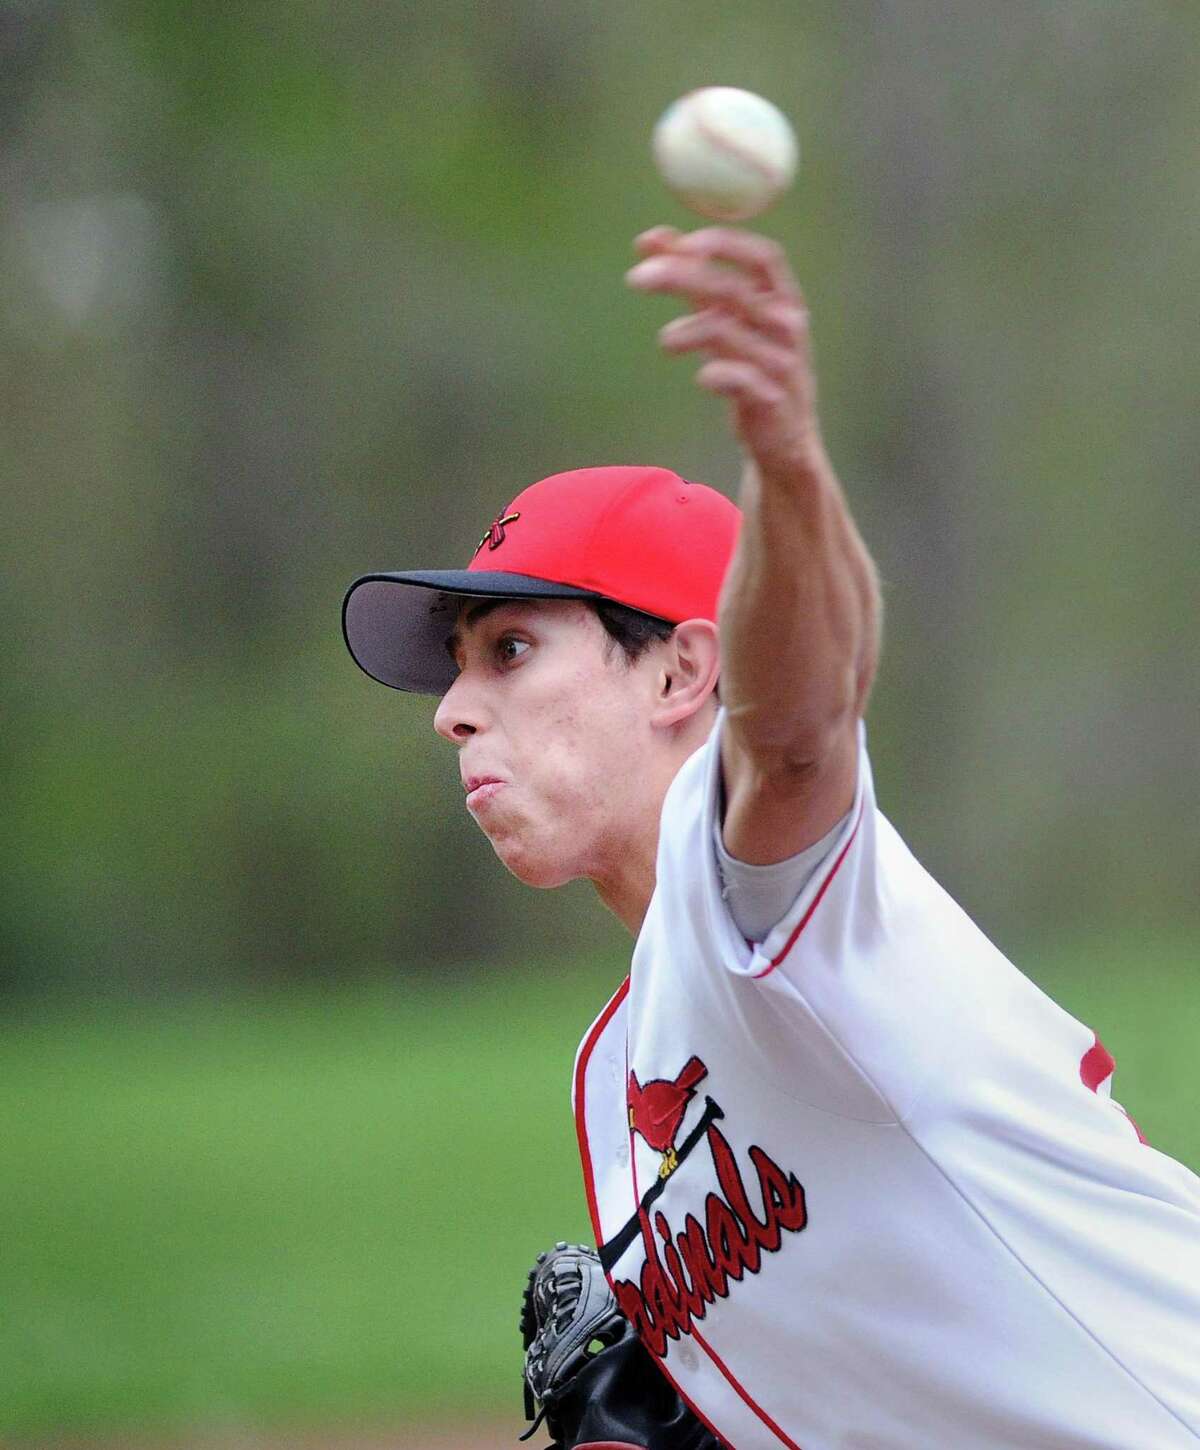 Greenwich pitcher Anthony Ferraro delivers a pitch during the Cardinals’ 7-2 victory over Stamford in Greenwich. Ferraro pitched a complete game.